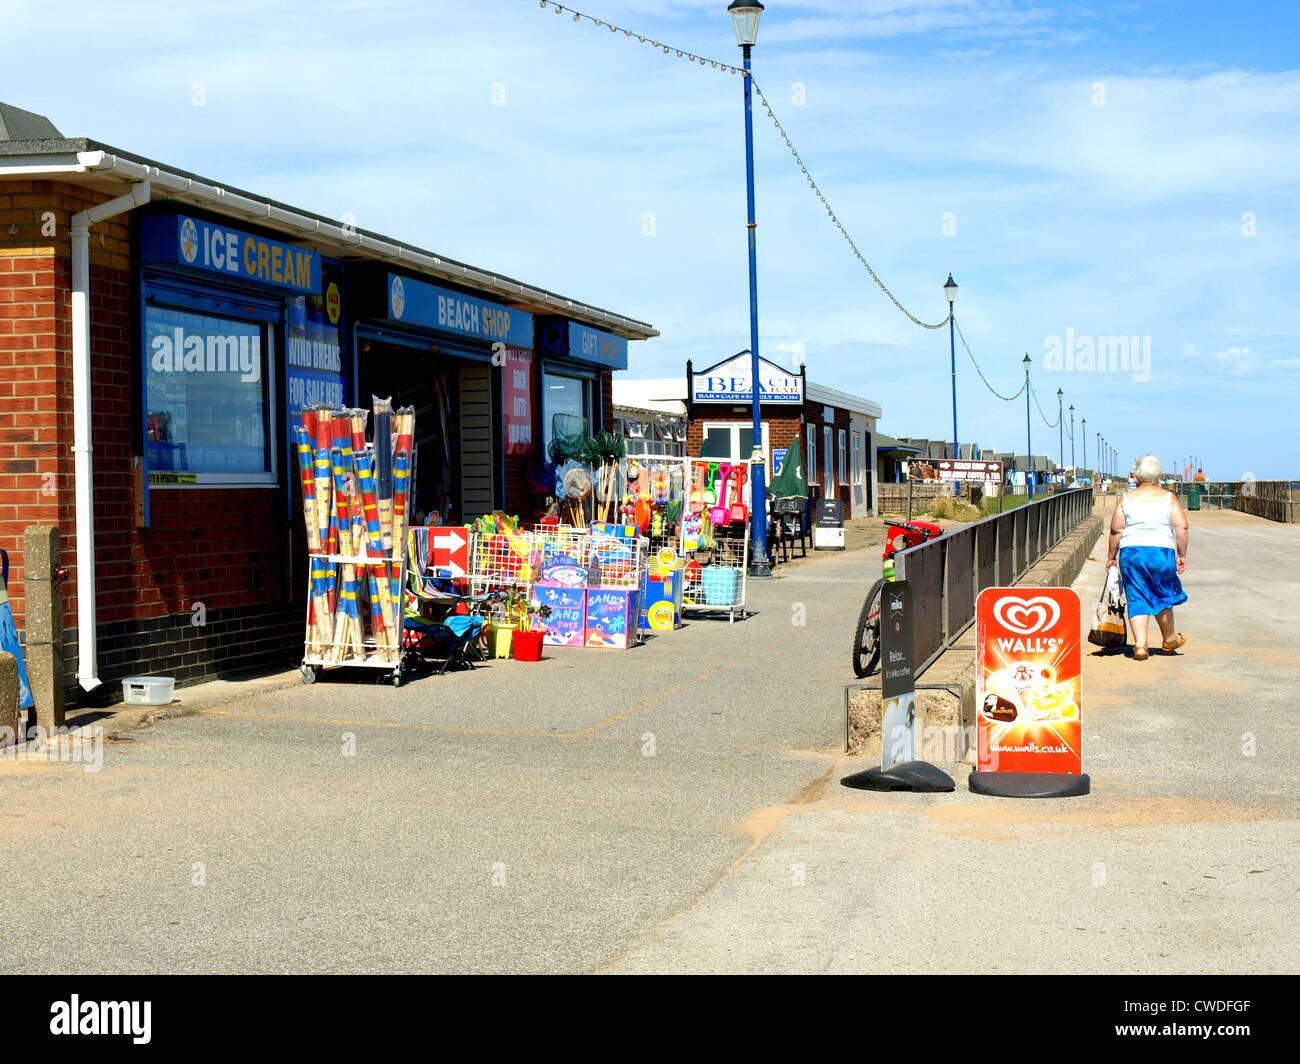 Beach shop on the promenade at Sutton-on-Sea, Lincolnshire, England, UK. Stock Photo